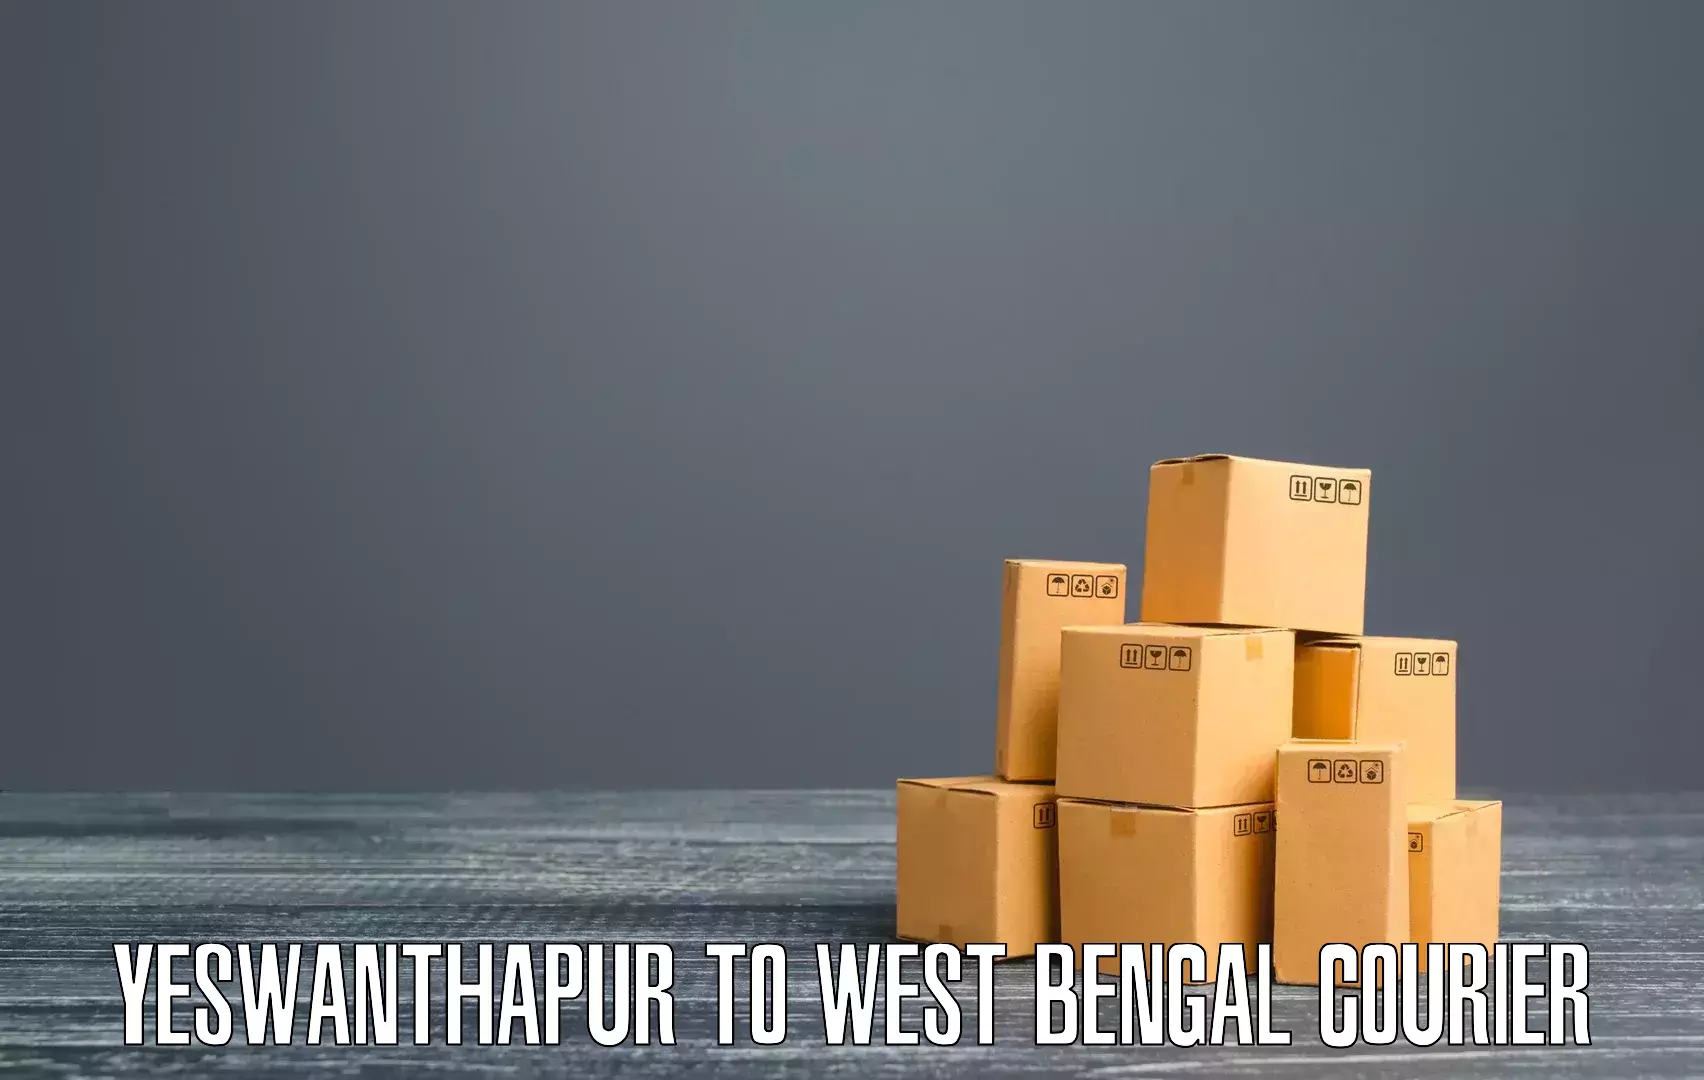 Express package handling Yeswanthapur to Haldia port